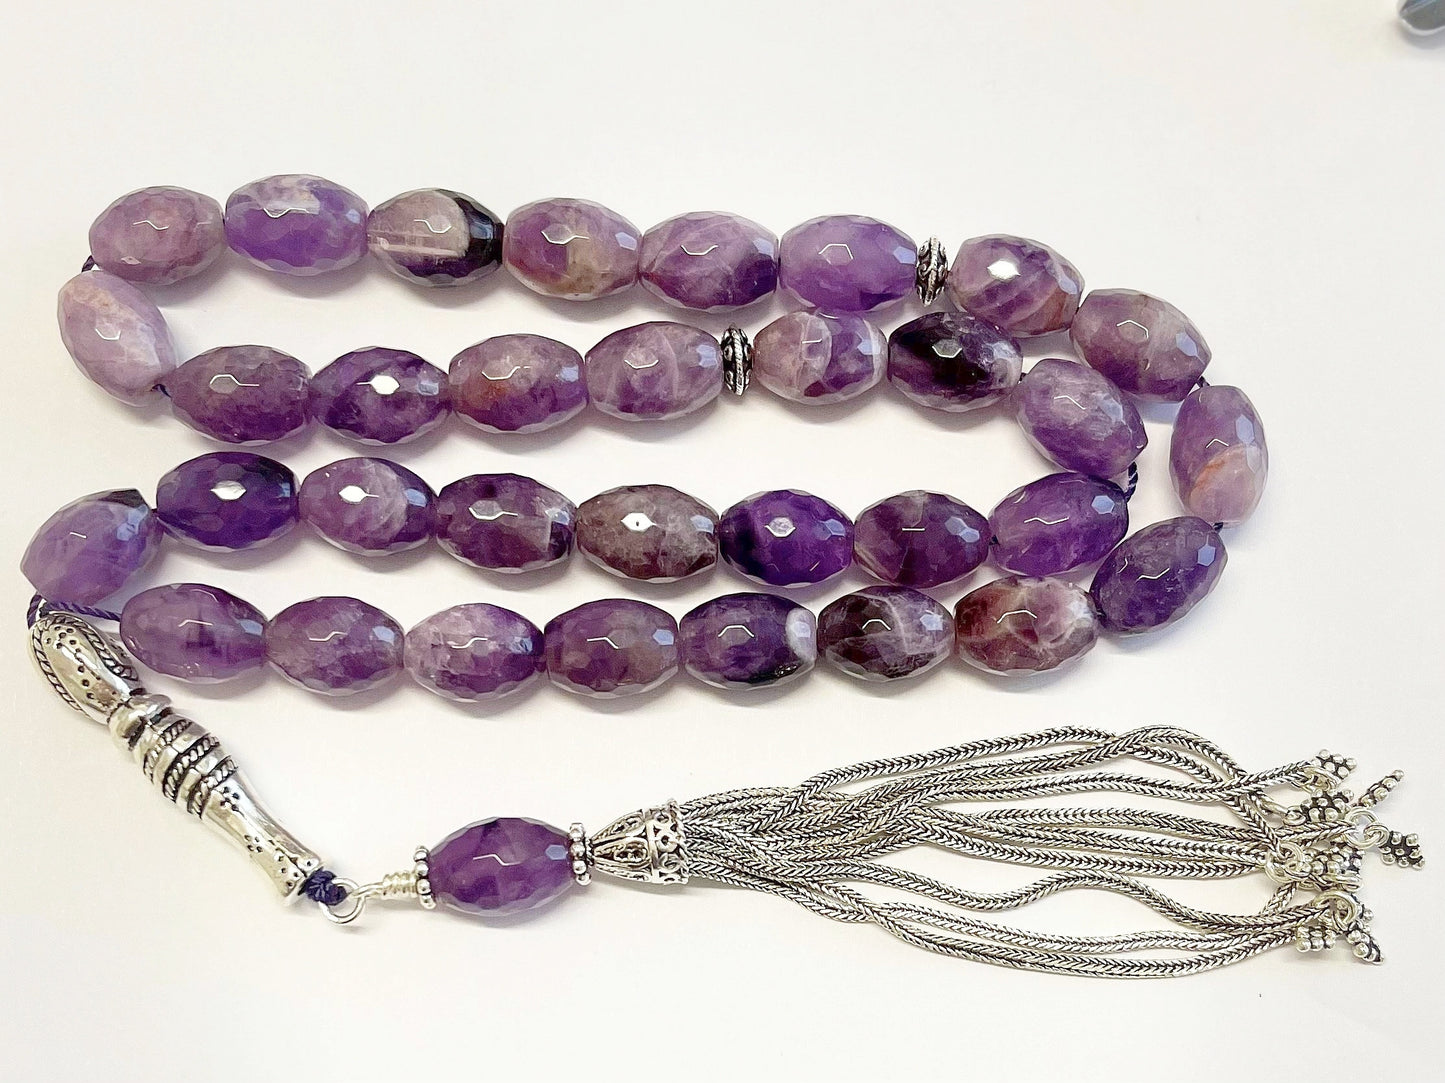 Luxury Prayer Beads RosaryTesbih AA Grade Faceted Oval Amethyst & Sterling - Rare Collector's